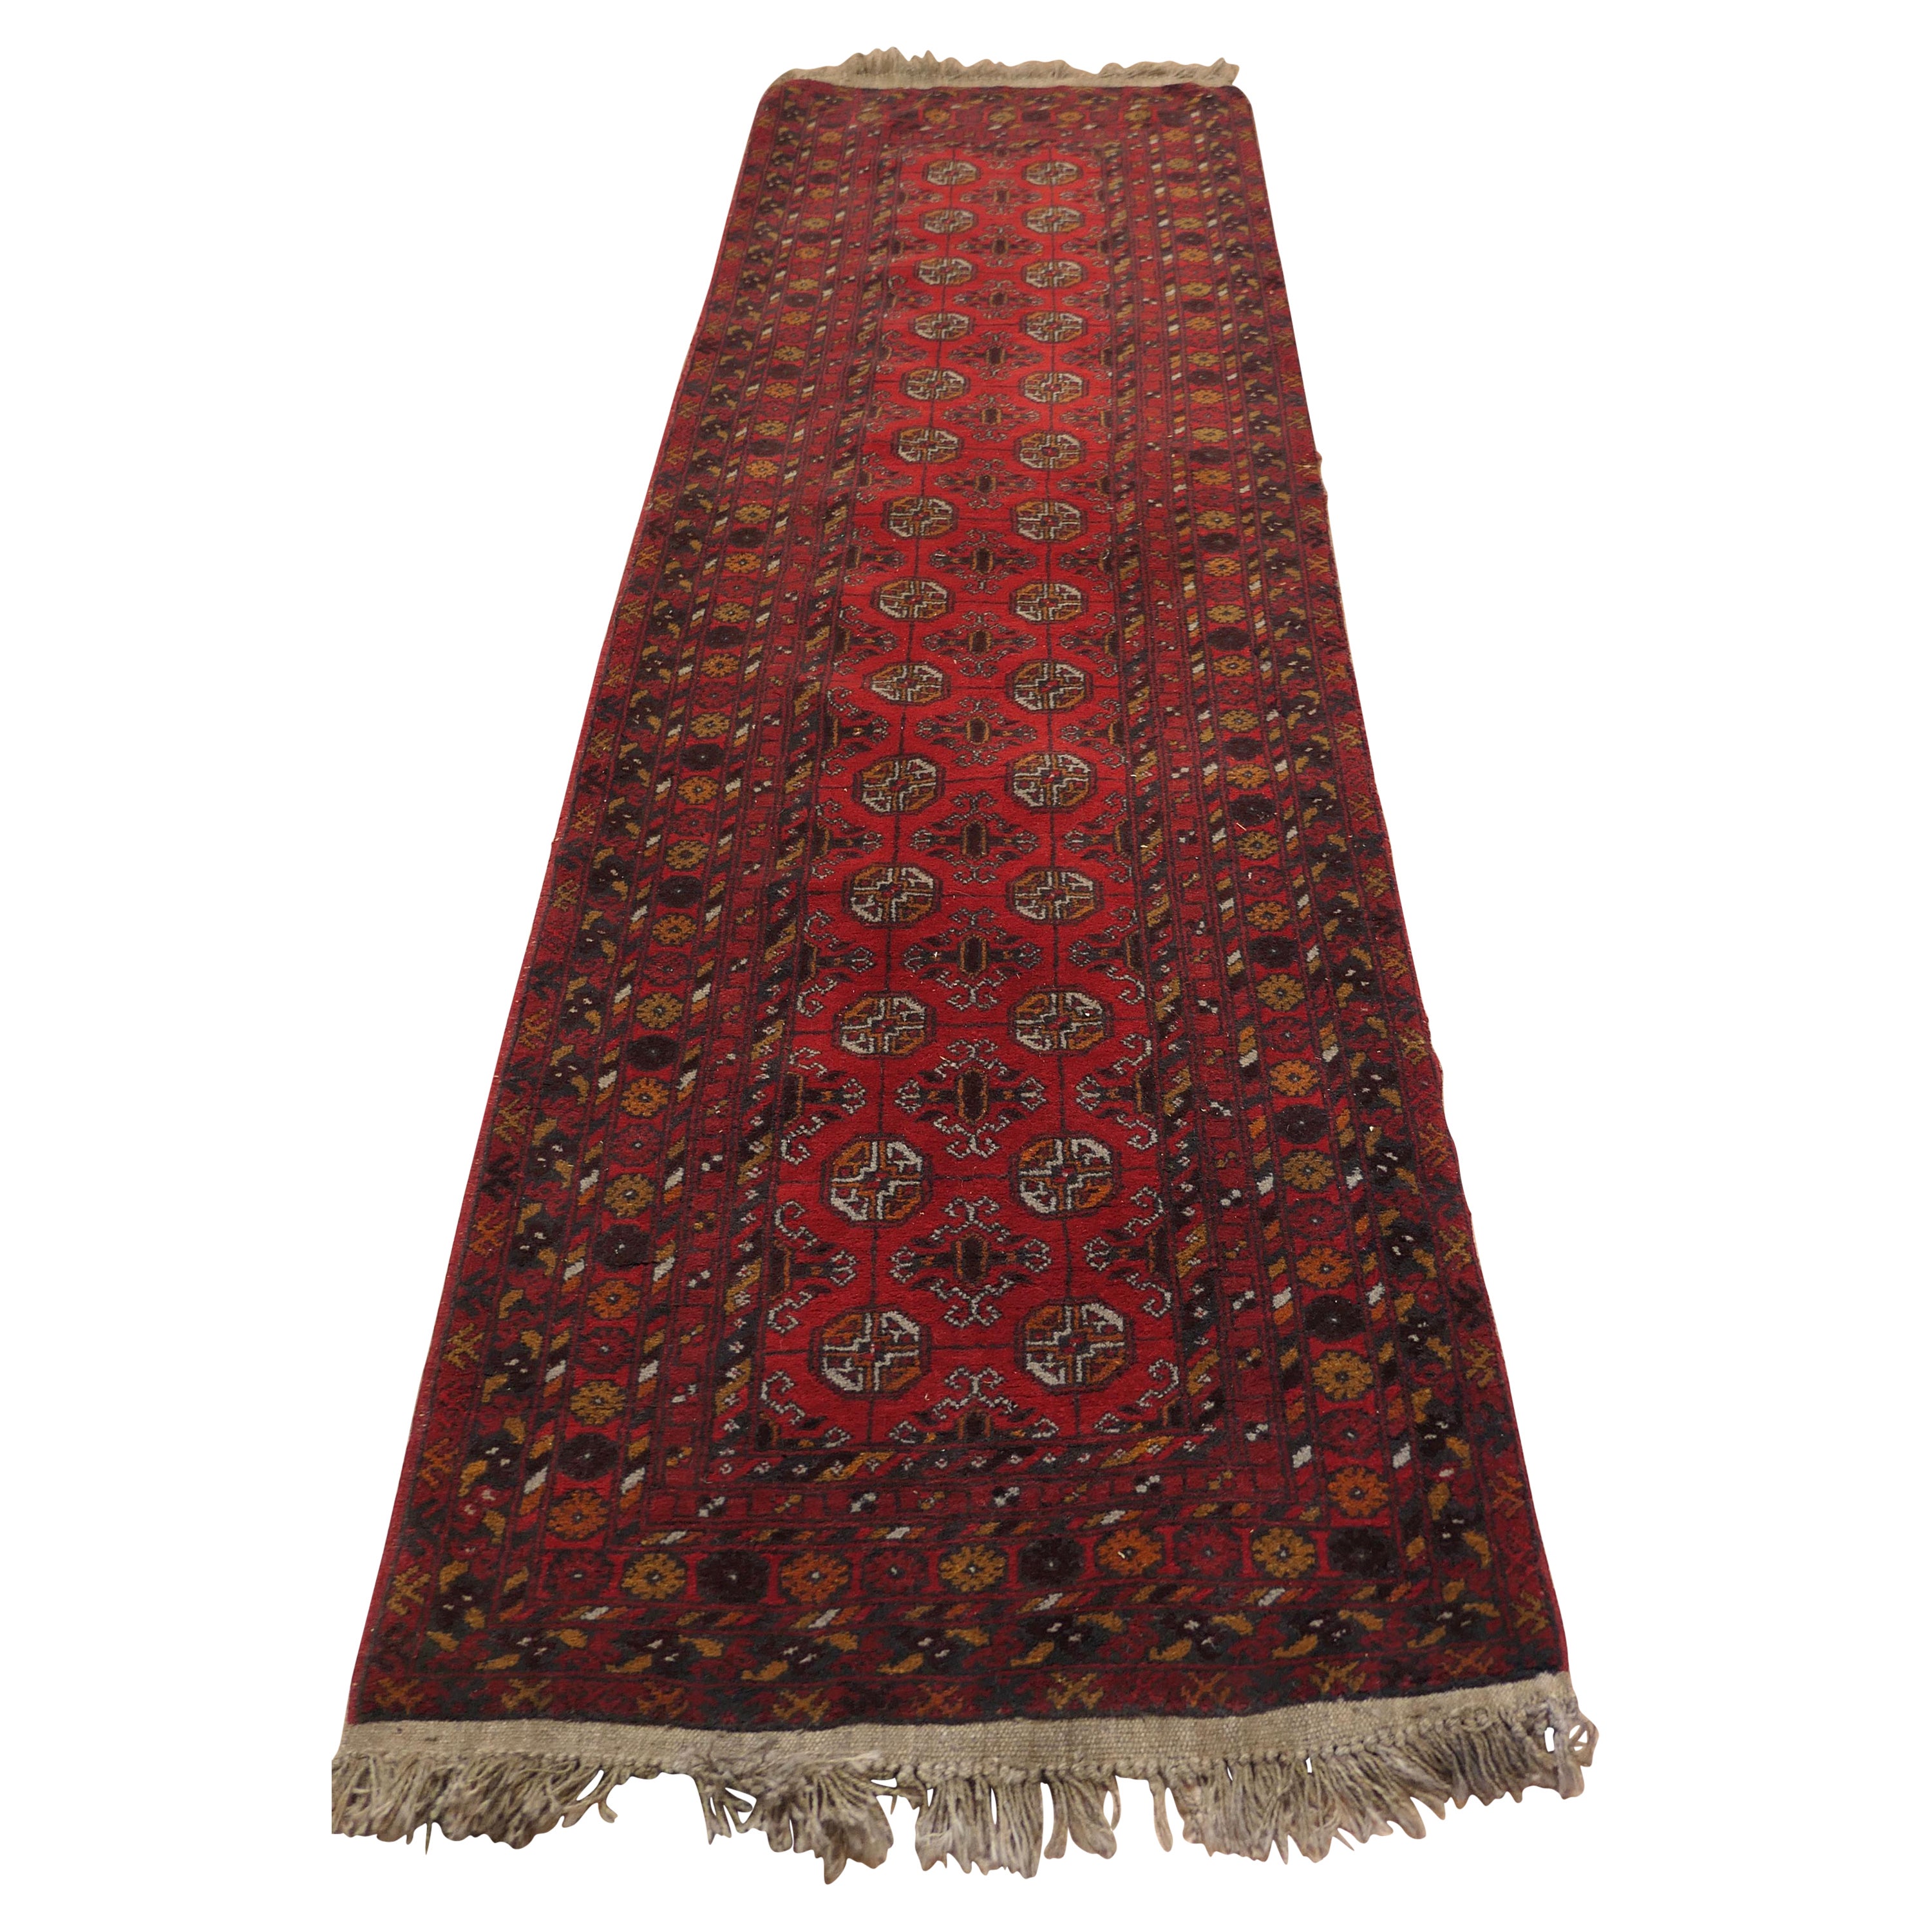 Vintage Traditional Pattern Wool Carpet Runner a Superb Looking Piece